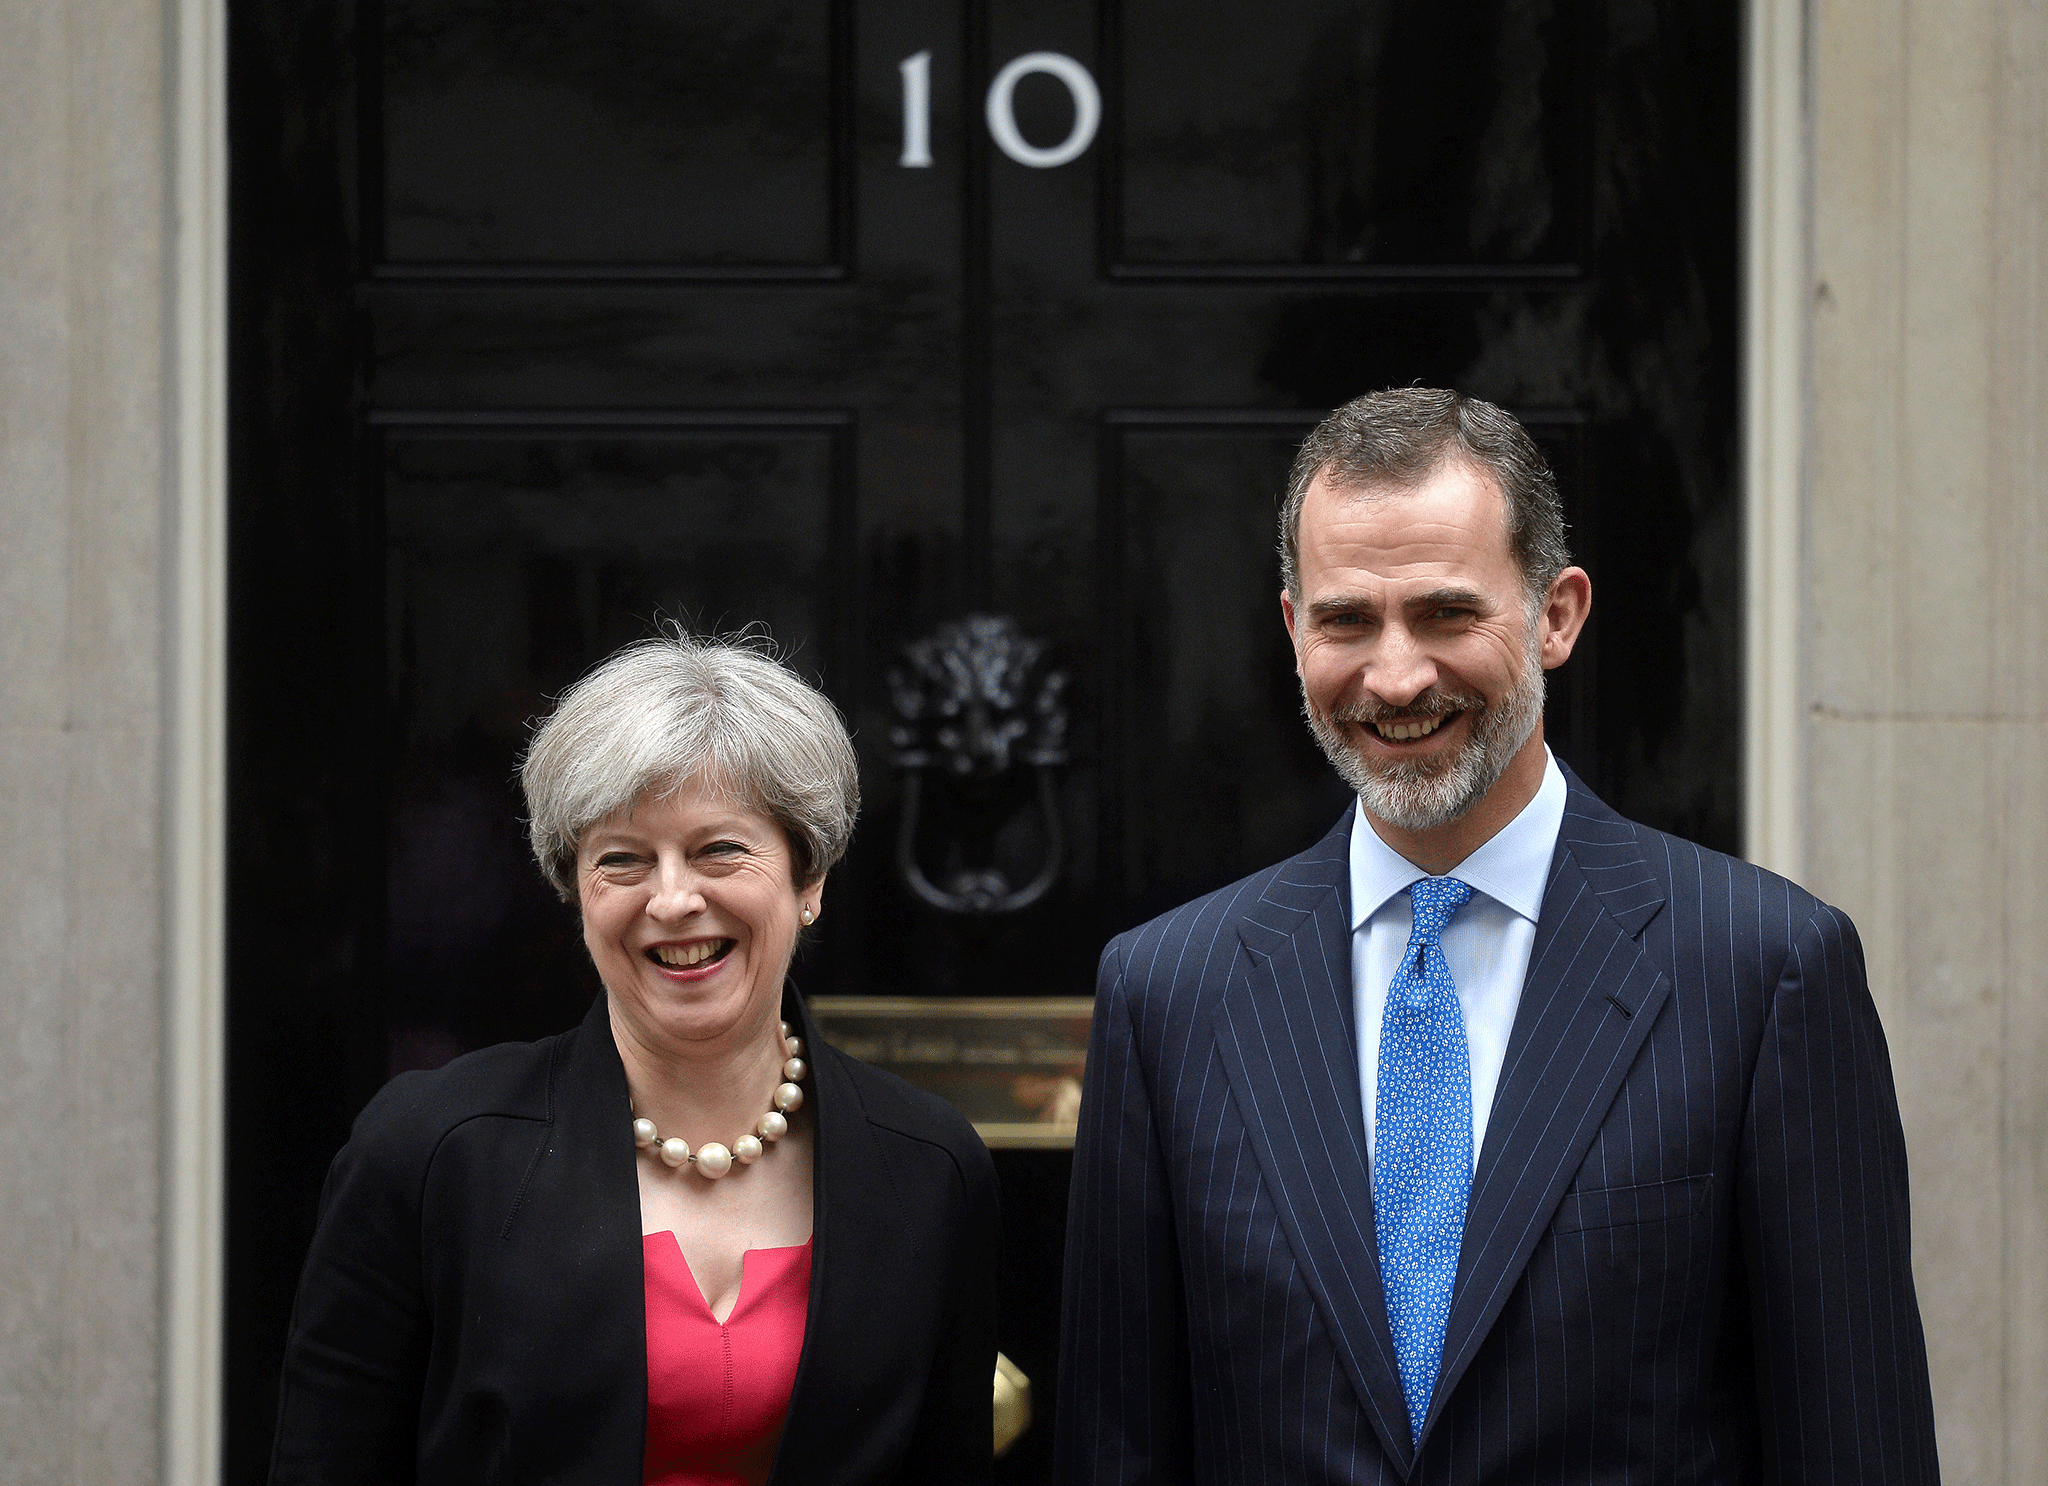 Spain’s King Felipe calls for minimal trade barriers after Brexit